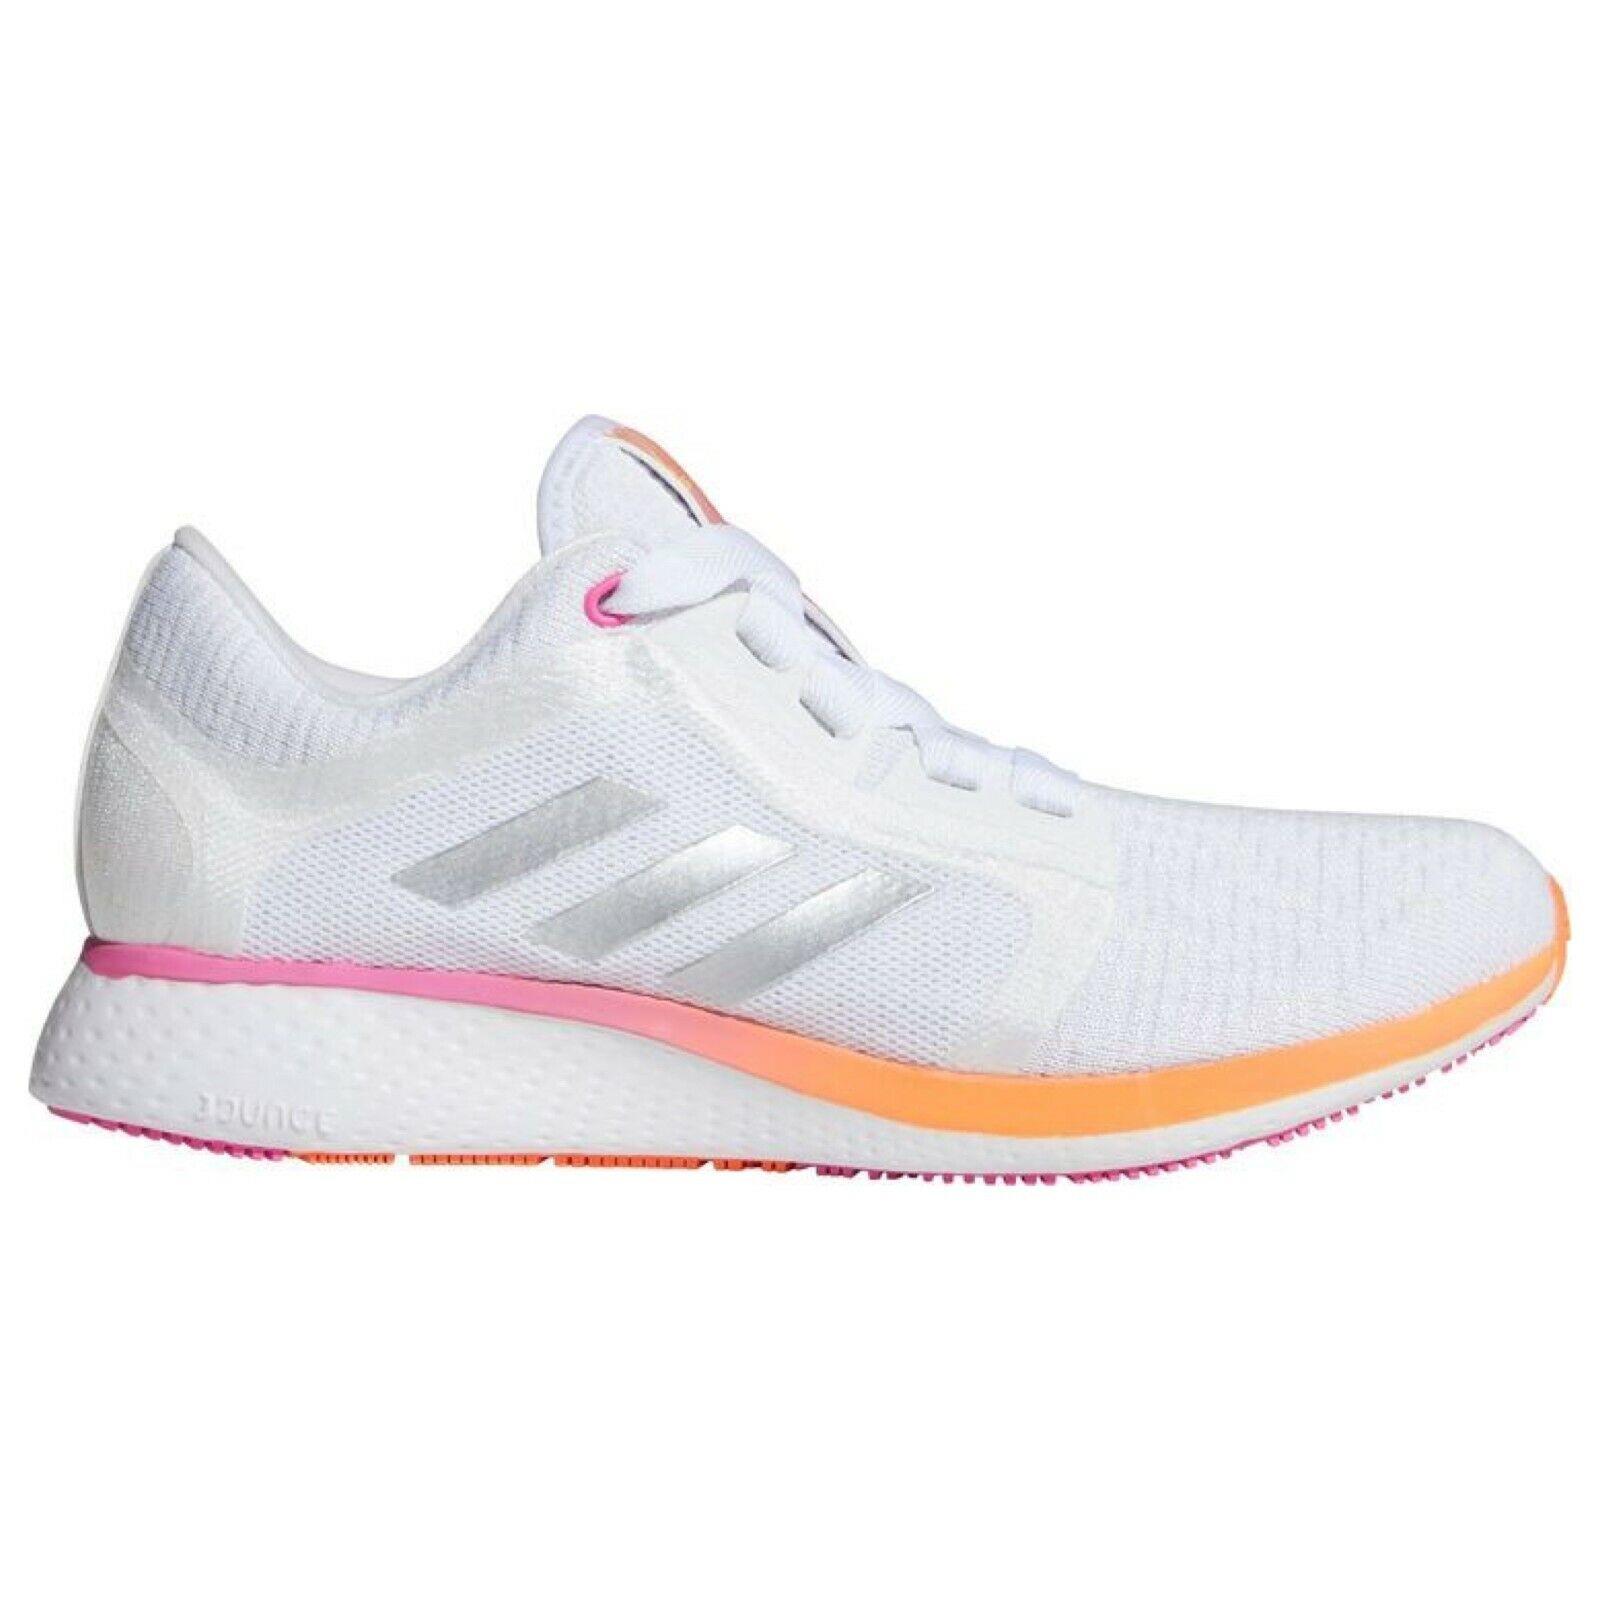 Adidas shoes Edge Lux - White , WHITE/PINK/YELLOW Manufacturer 10